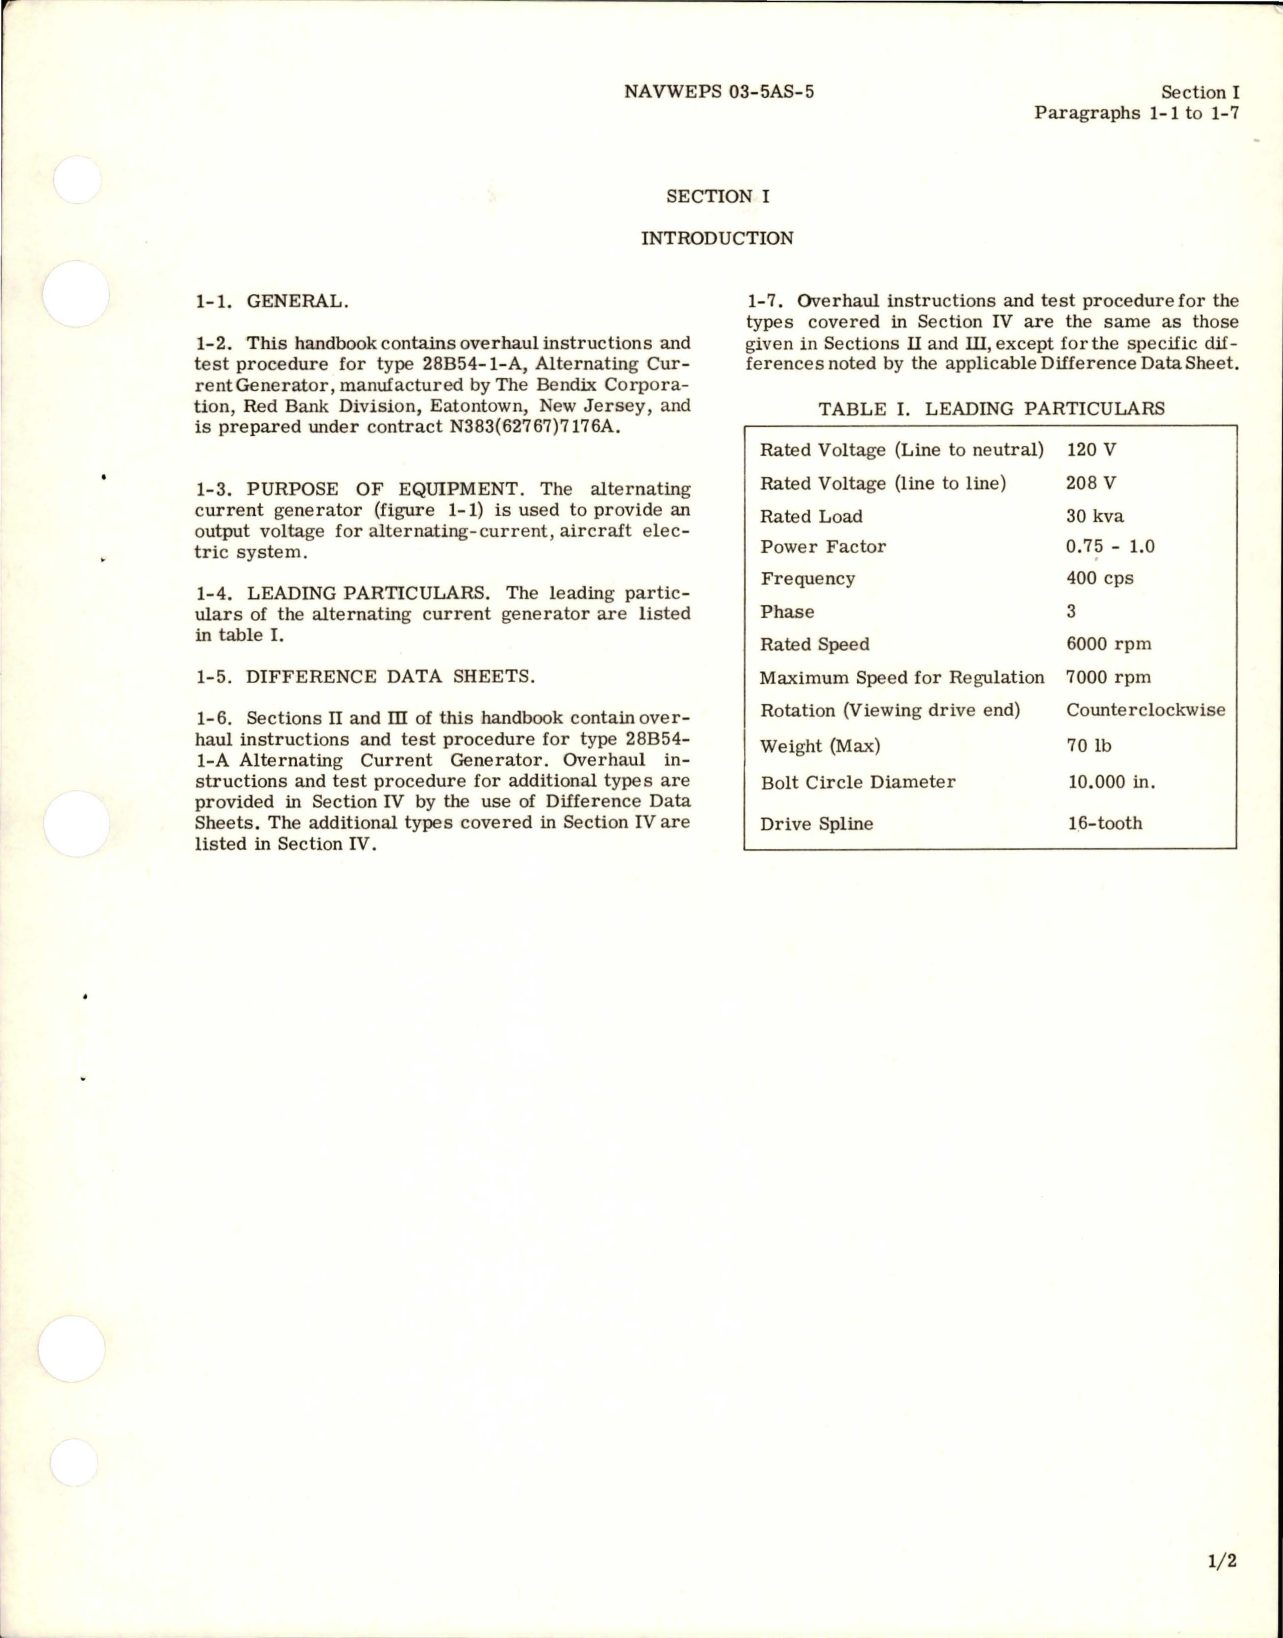 Sample page 5 from AirCorps Library document: Overhaul Instructions for Alternating Current Generator - Type 28B54-1-A and 28B54-9-A